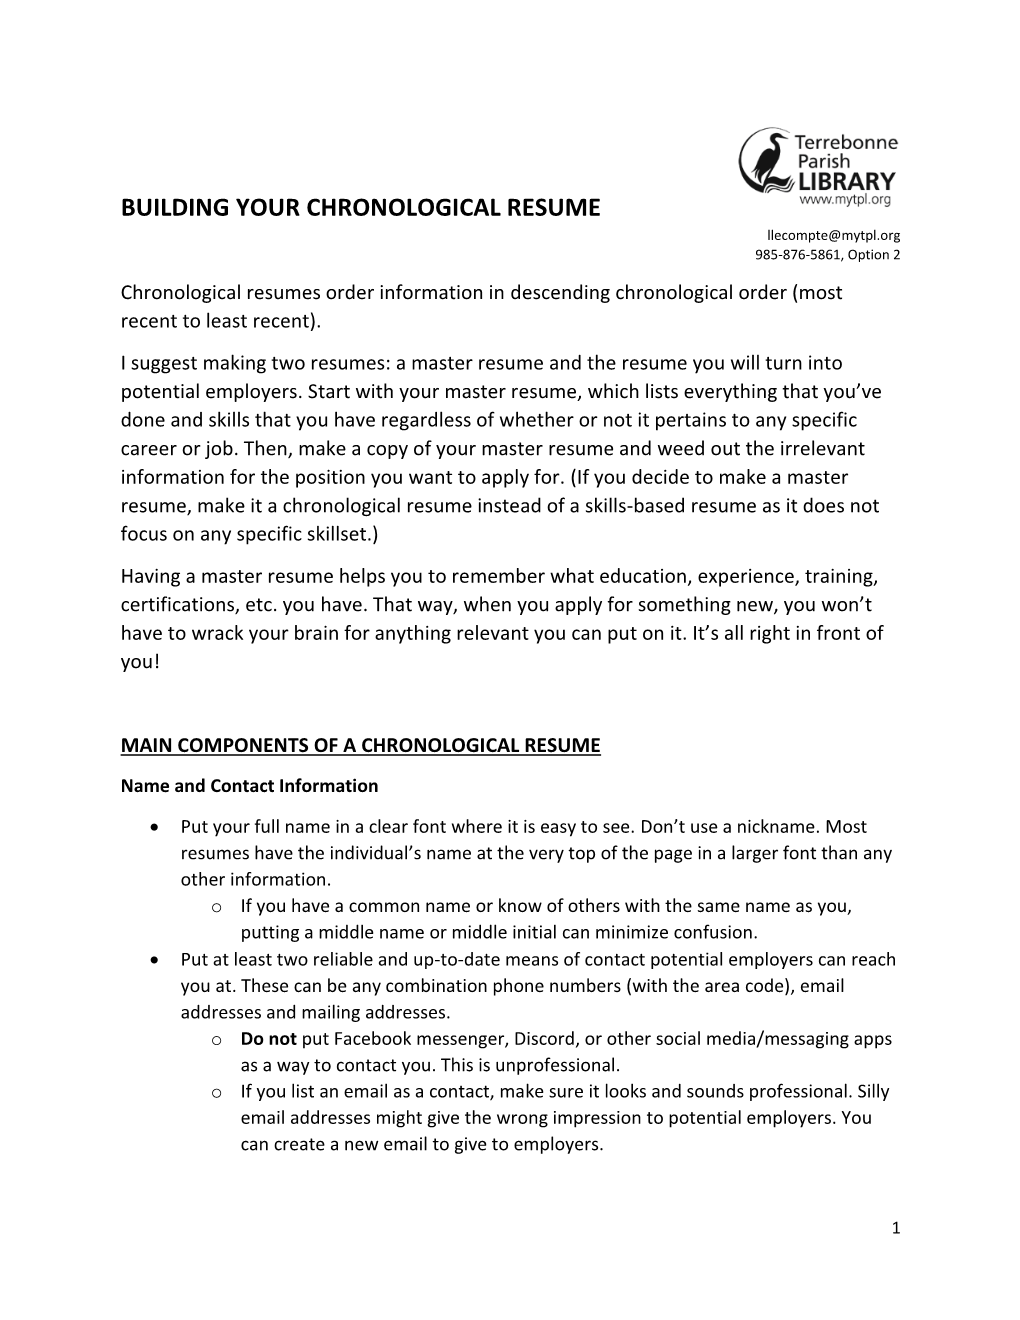 Building Your Chronological Resume